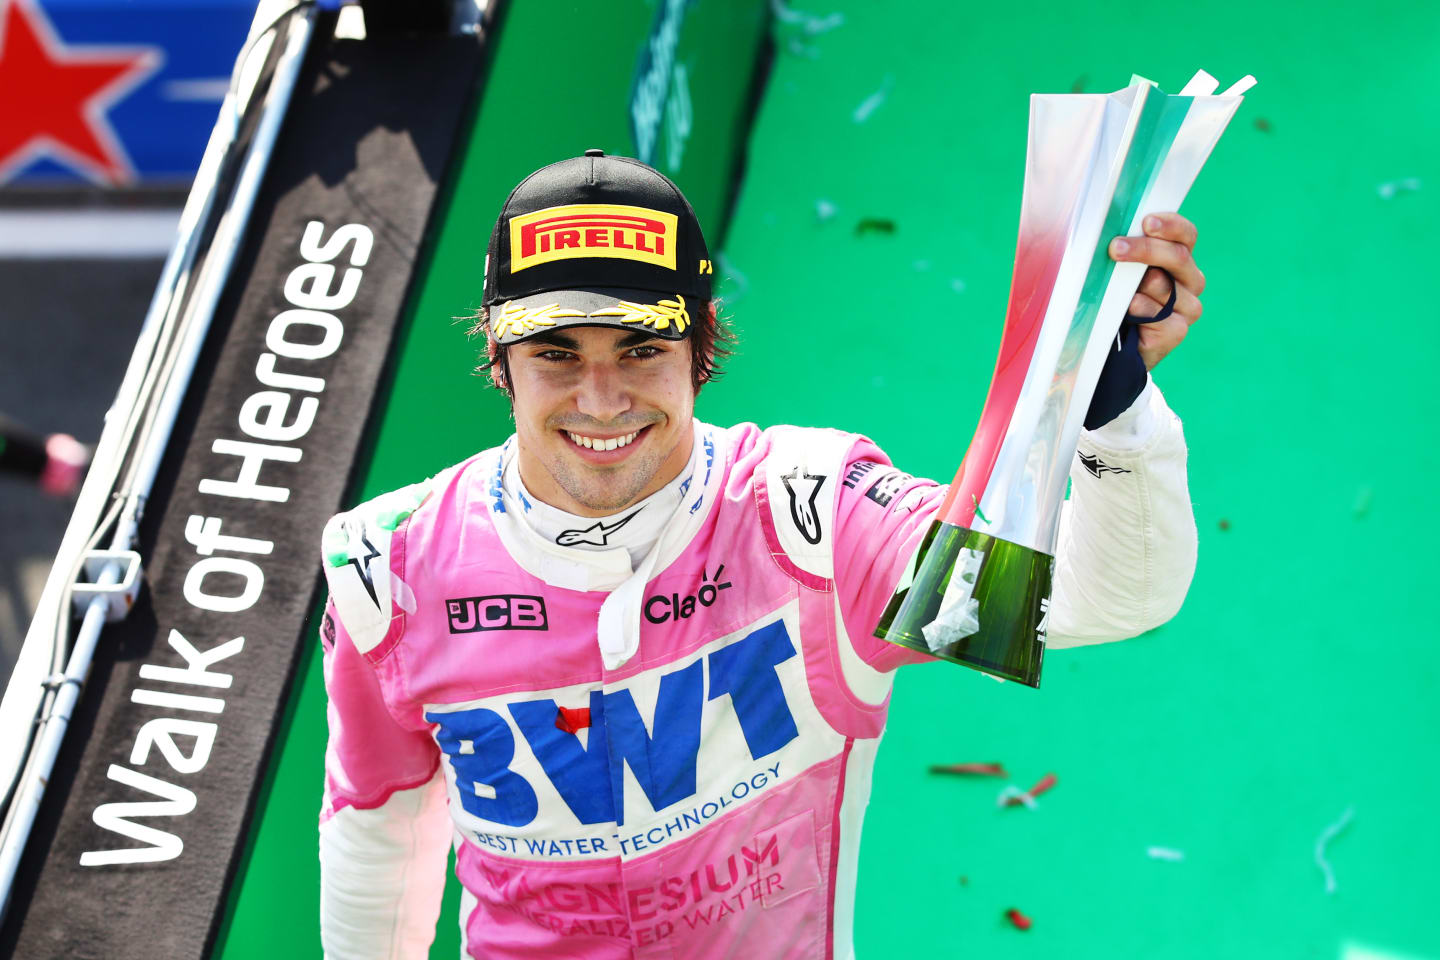 MONZA, ITALY - SEPTEMBER 06: Third placed Lance Stroll of Canada and Racing Point celebrates on the